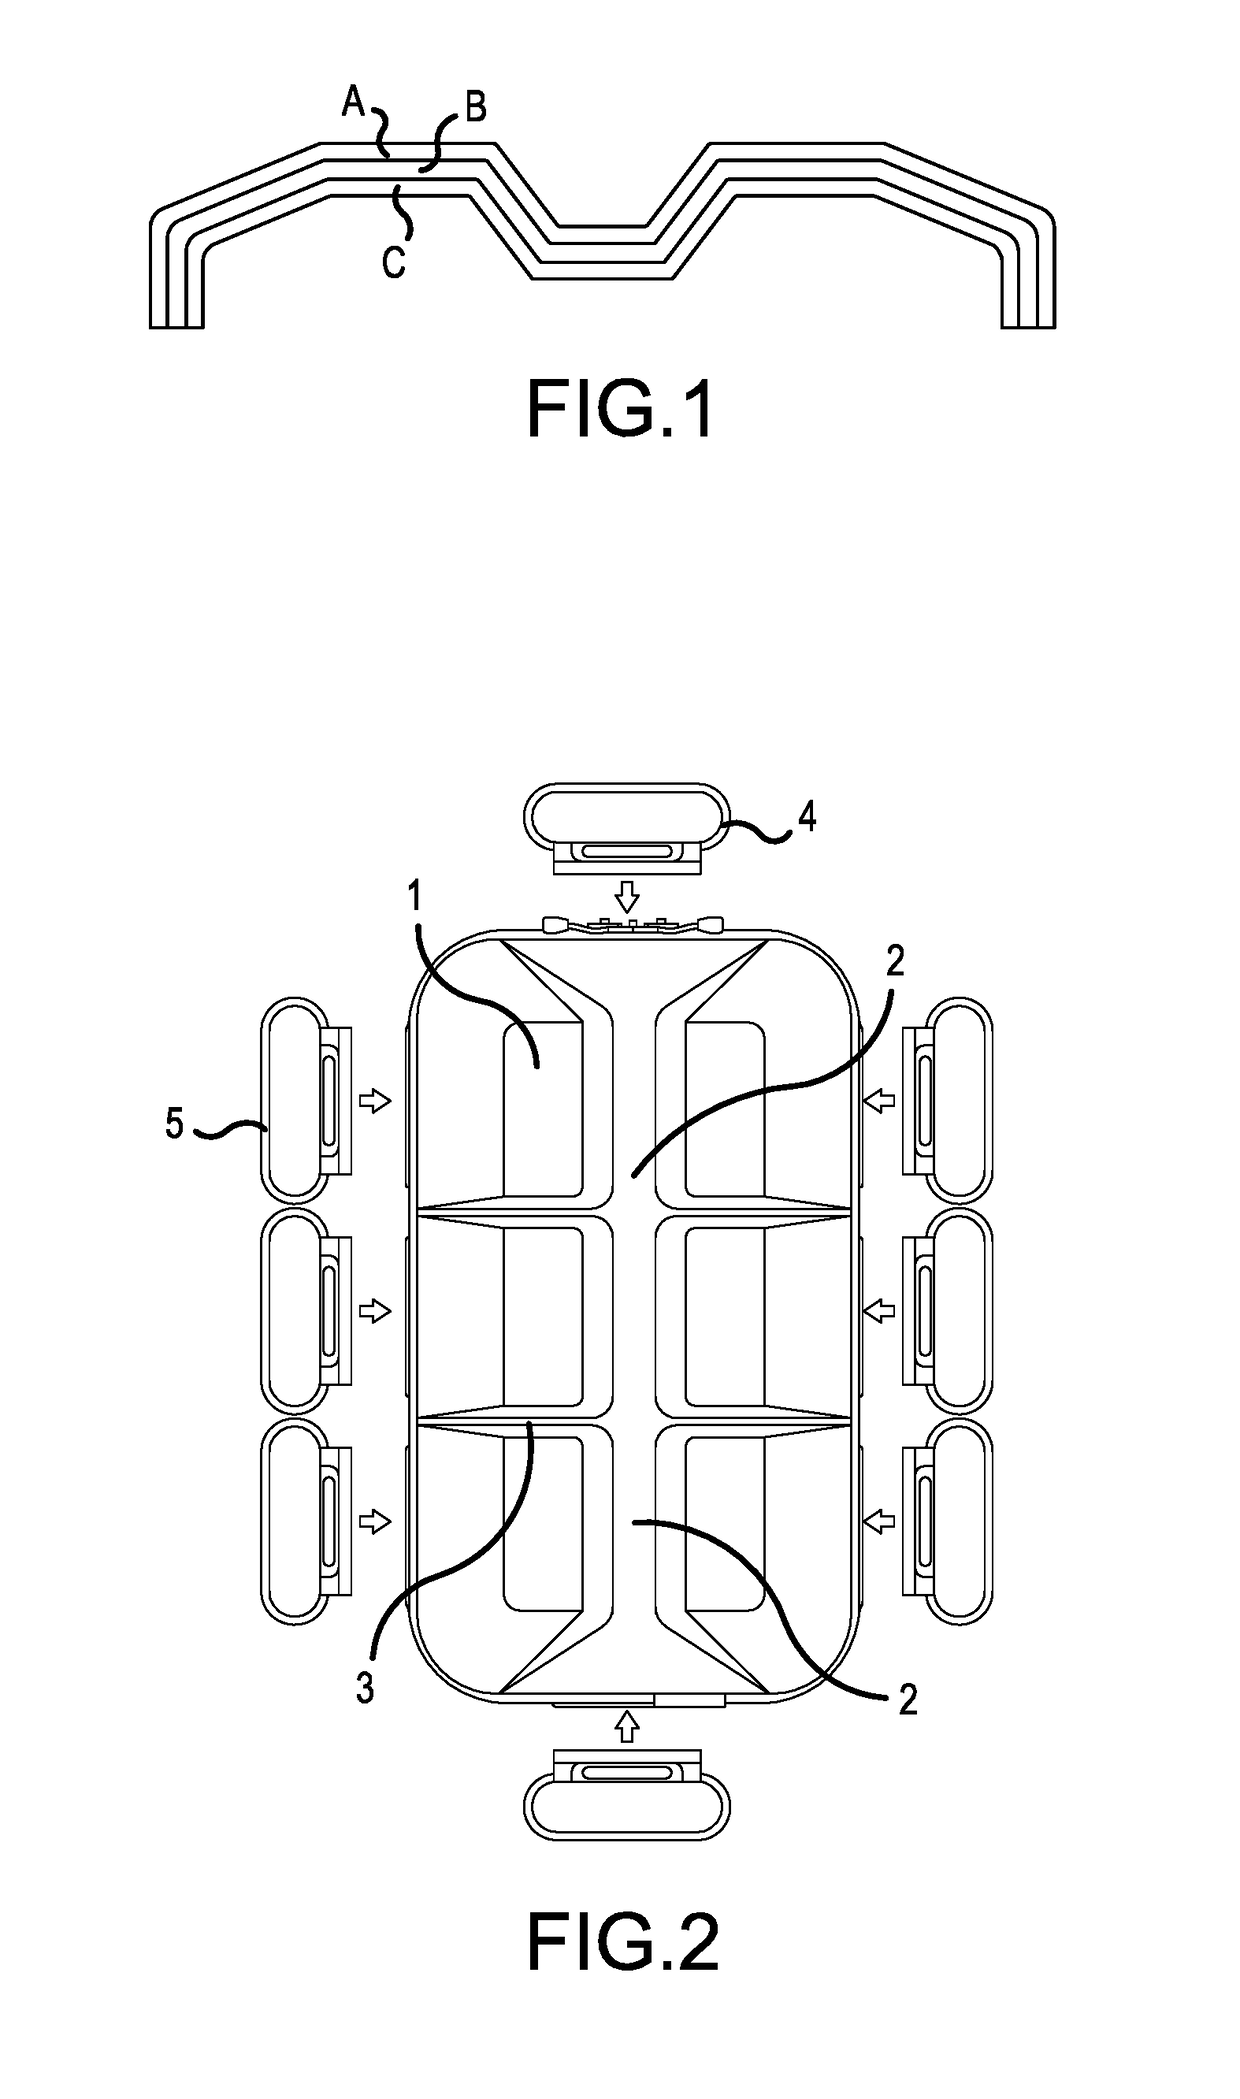 Material of storage device, storage device and a bag thereof